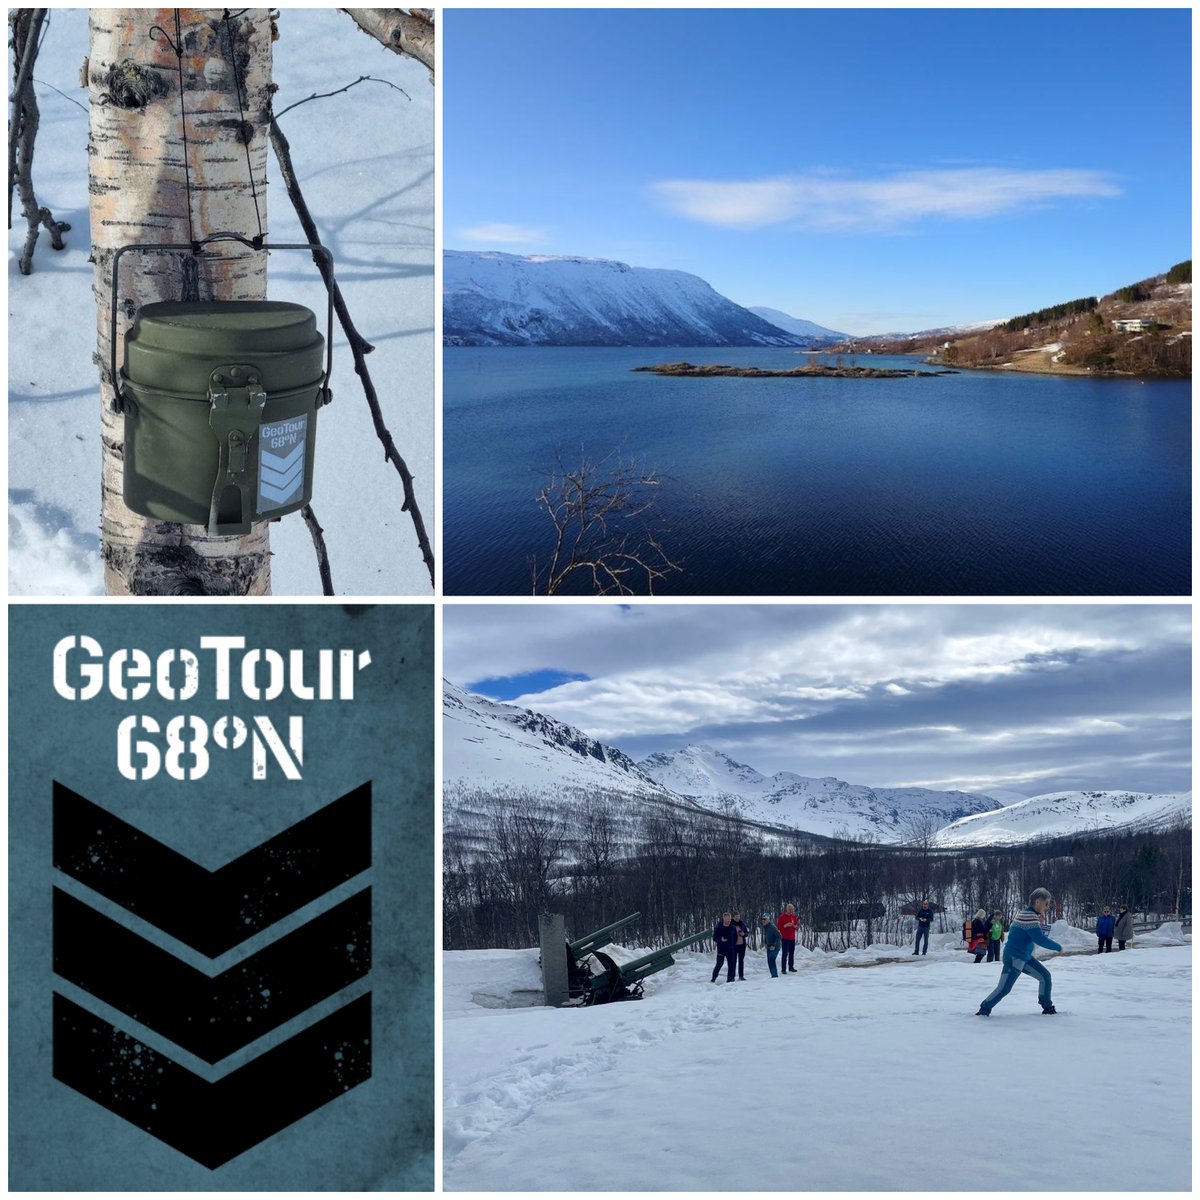 ❄️ Looking to take your #geocaching adventure north? How about 68º North? ❄️ 🔗 coord.info/GT4E4 🔗 Check out #GeoTour 68° N - 2024 edition (GT4E4), where you can earn a digital souvenir and a geocoin by finding all 20 caches. 🏆